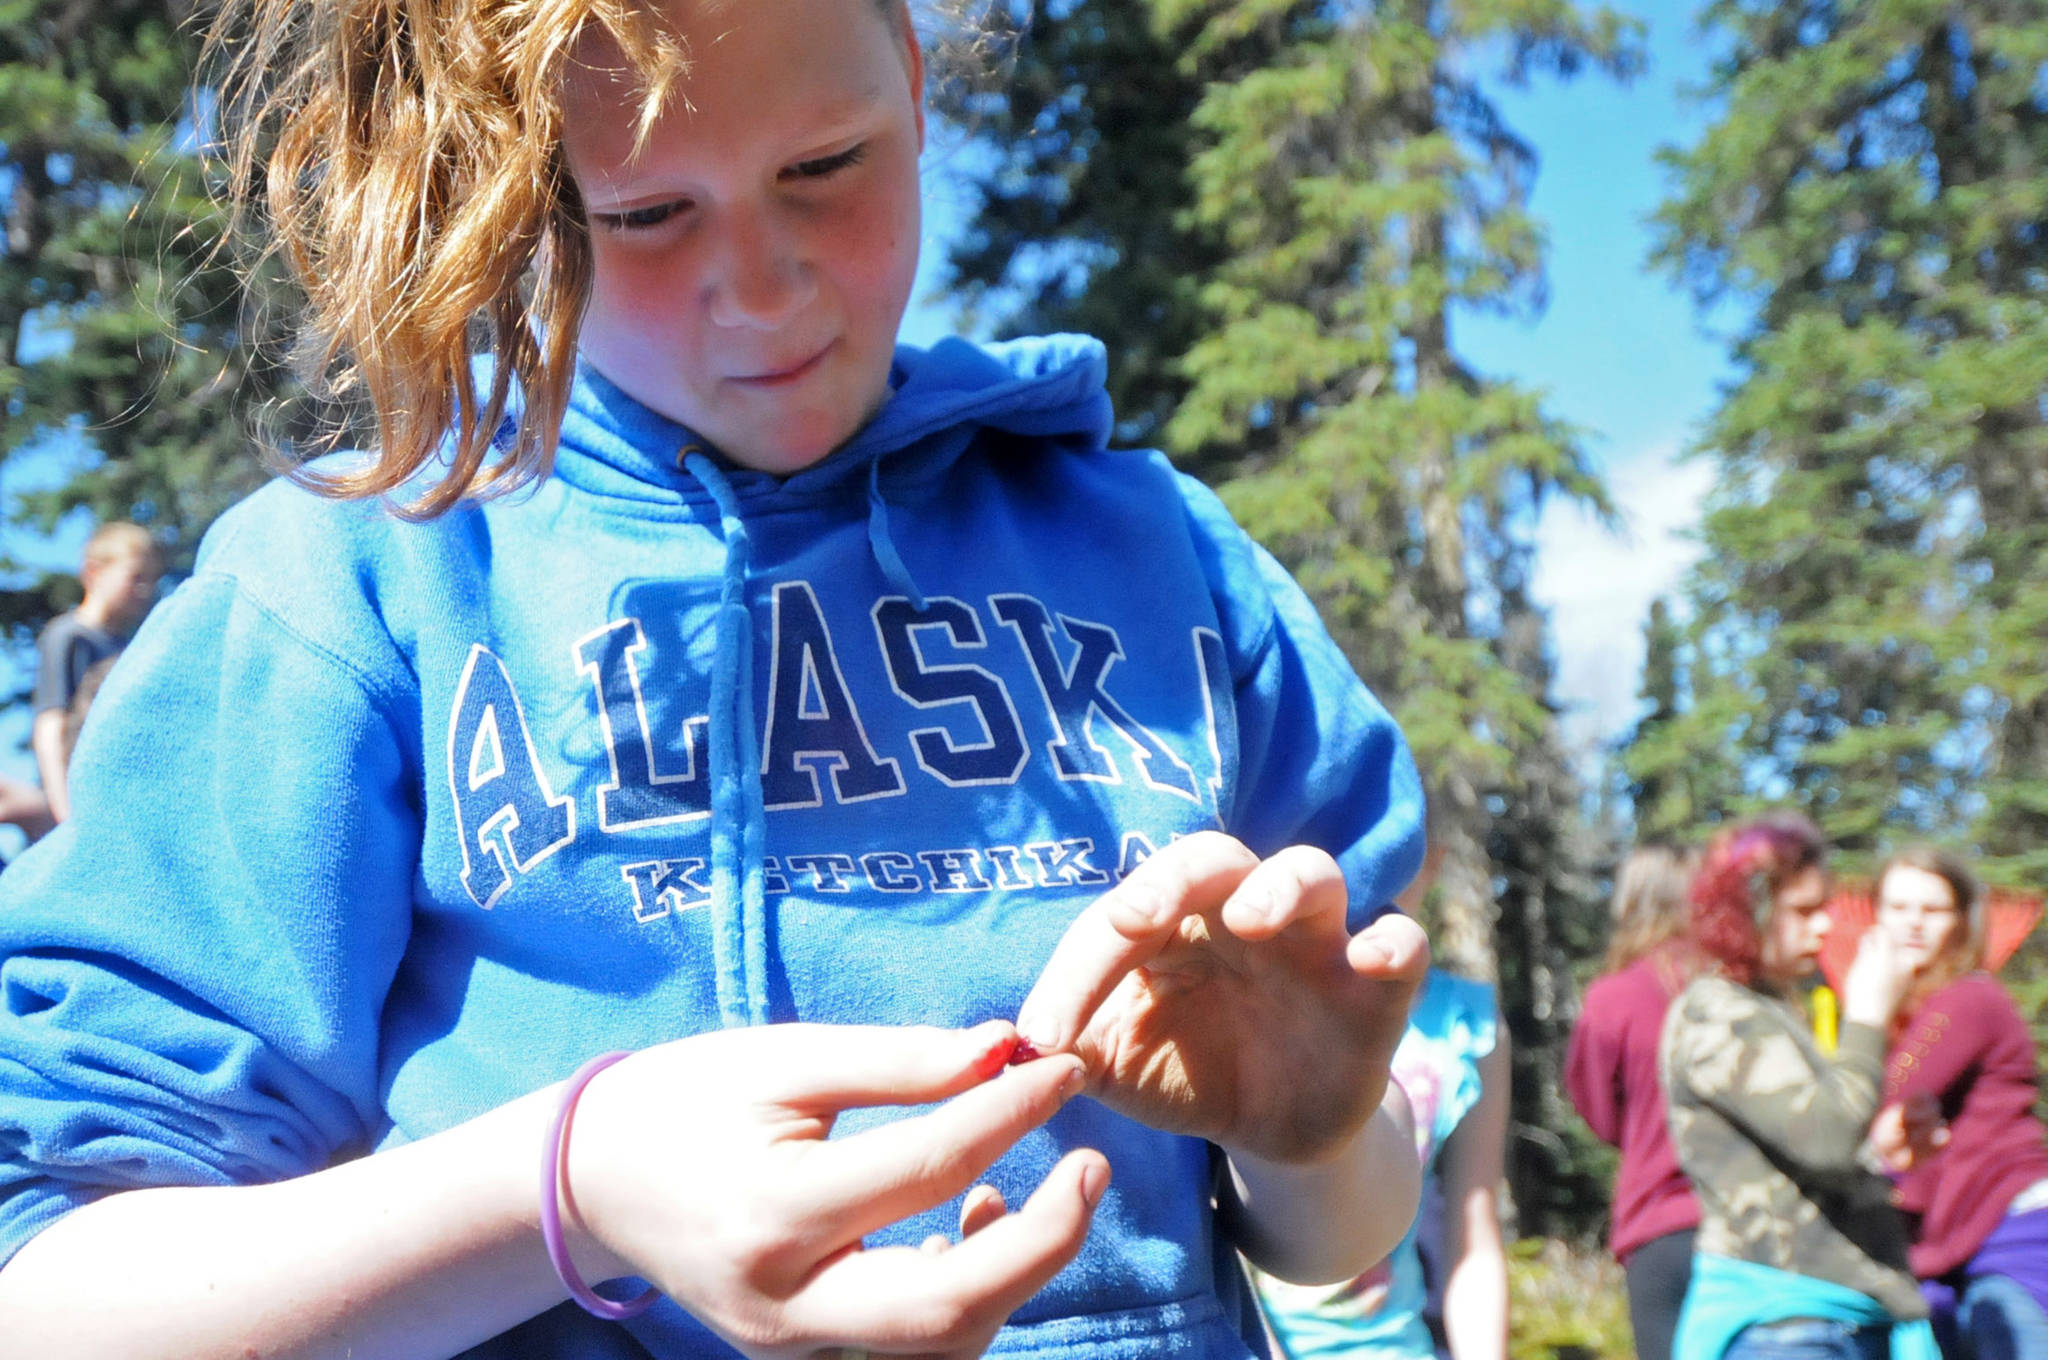 Heaven Engle, a 6th grade student at Tustumena Elementary School, inspects a lowbush cranberry on a trail near the school on Tuesday, May 22, 2018 in Kasilof, Alaska. (Photo by Elizabeth Earl/Peninsula Clarion)